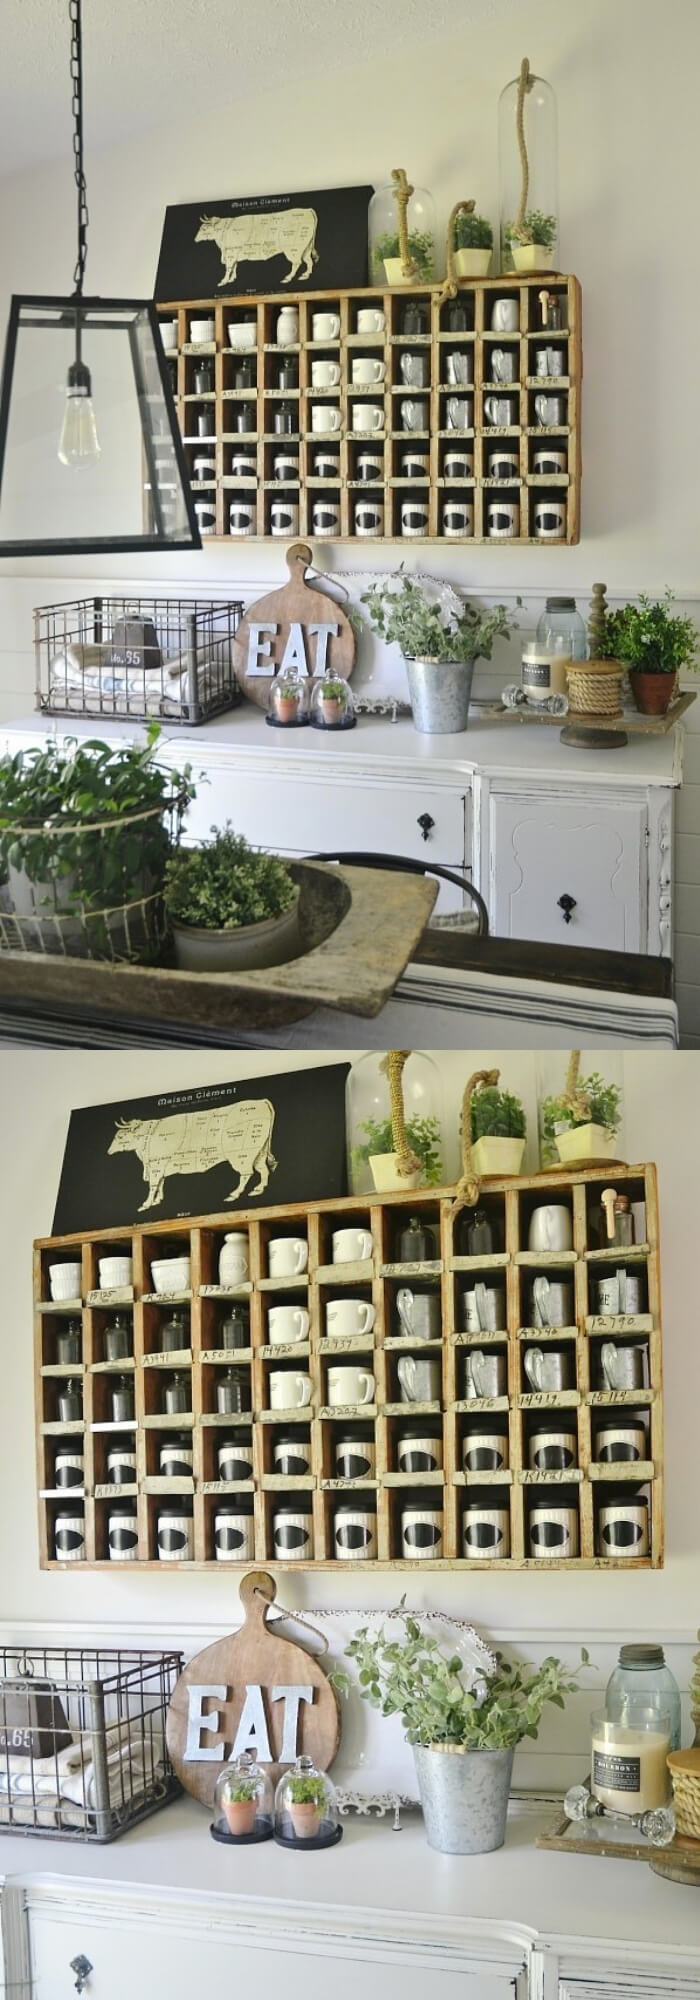 Cubbies with black & white spice jars | Stunning Farmhouse Dining Room Design & Decor Ideas